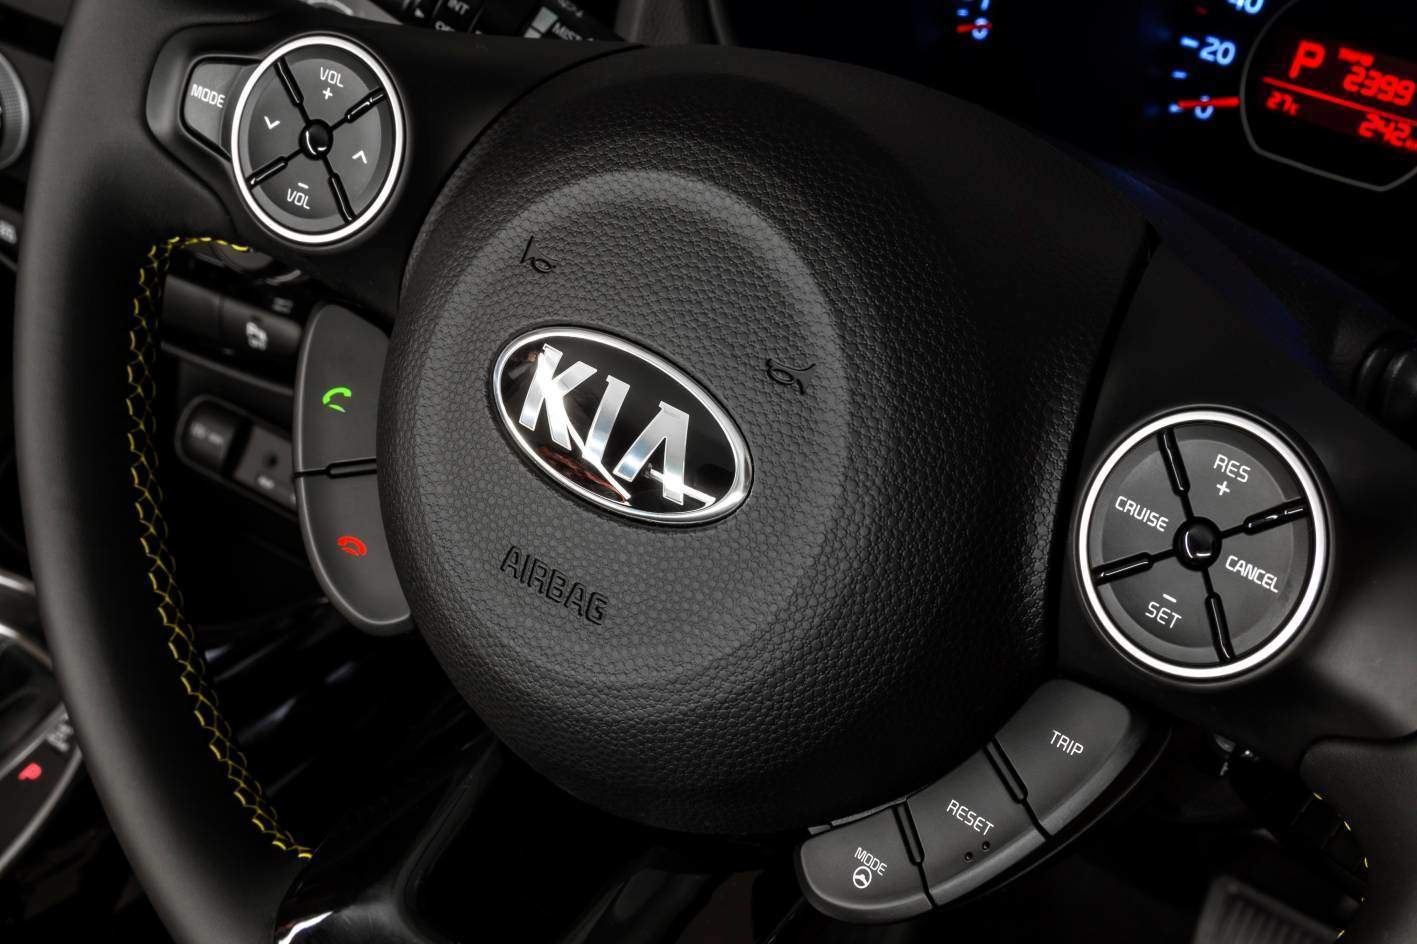 Seat-belt recall for two Kia models